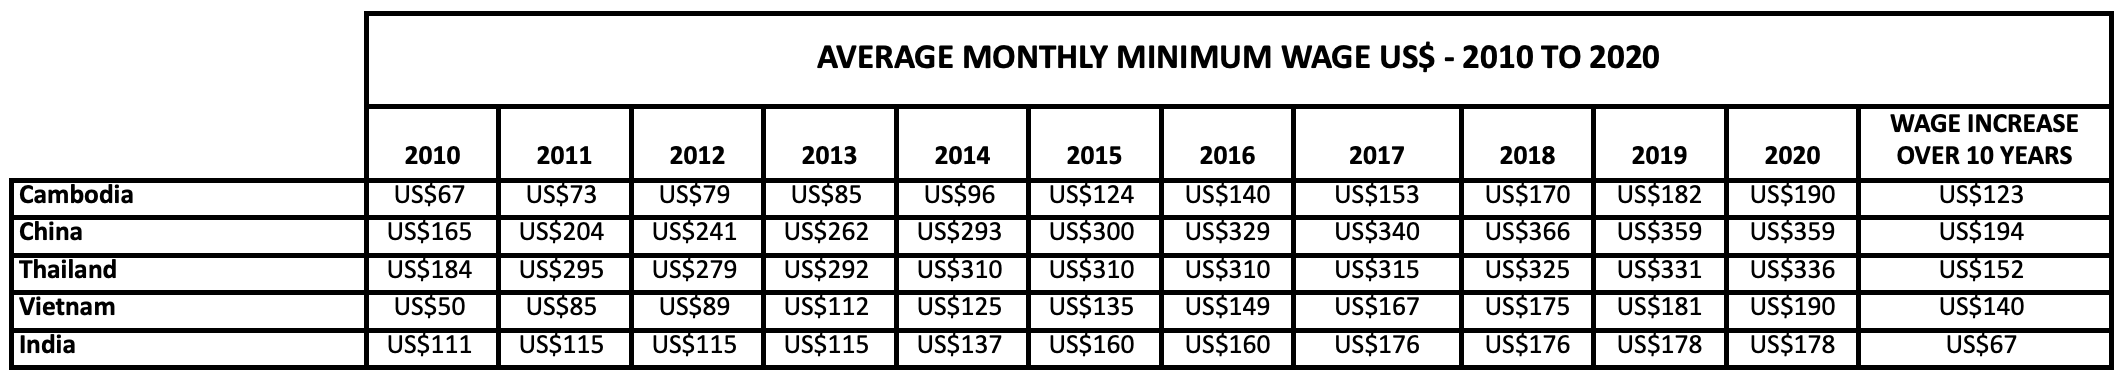 asia average monthly minimum wage in usd 2010 to 2020